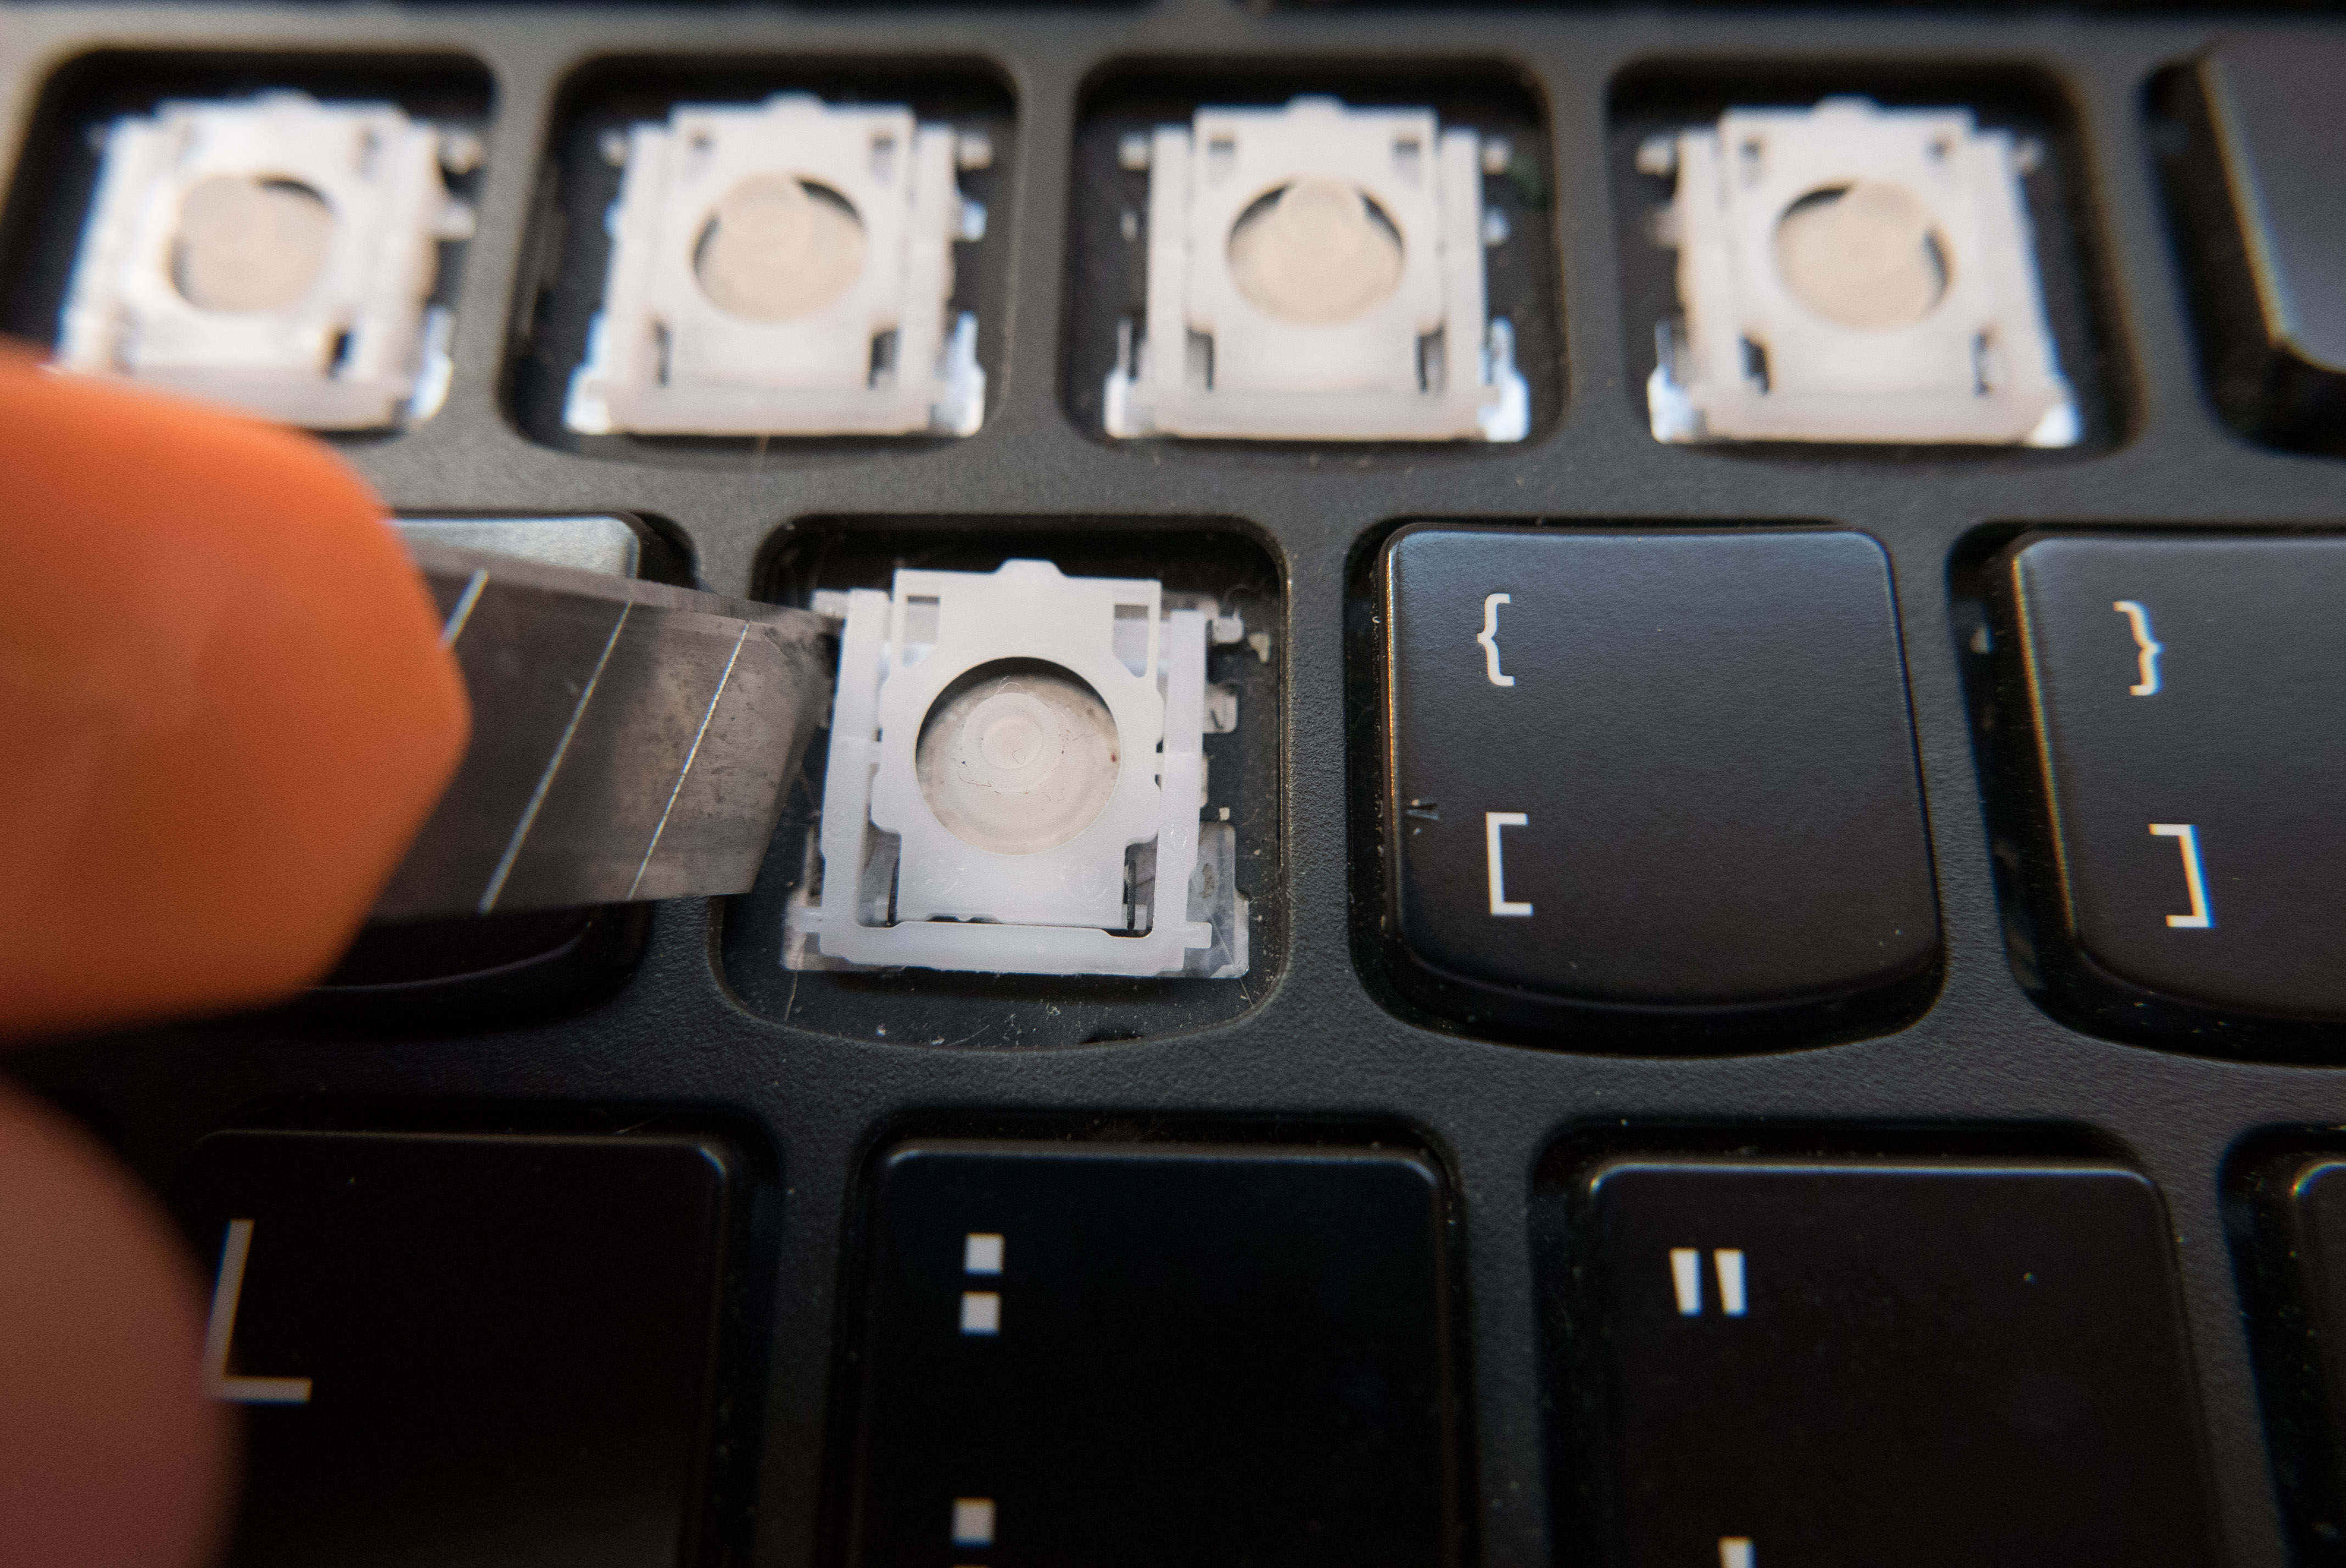 Image result for removing the laptop keycaps